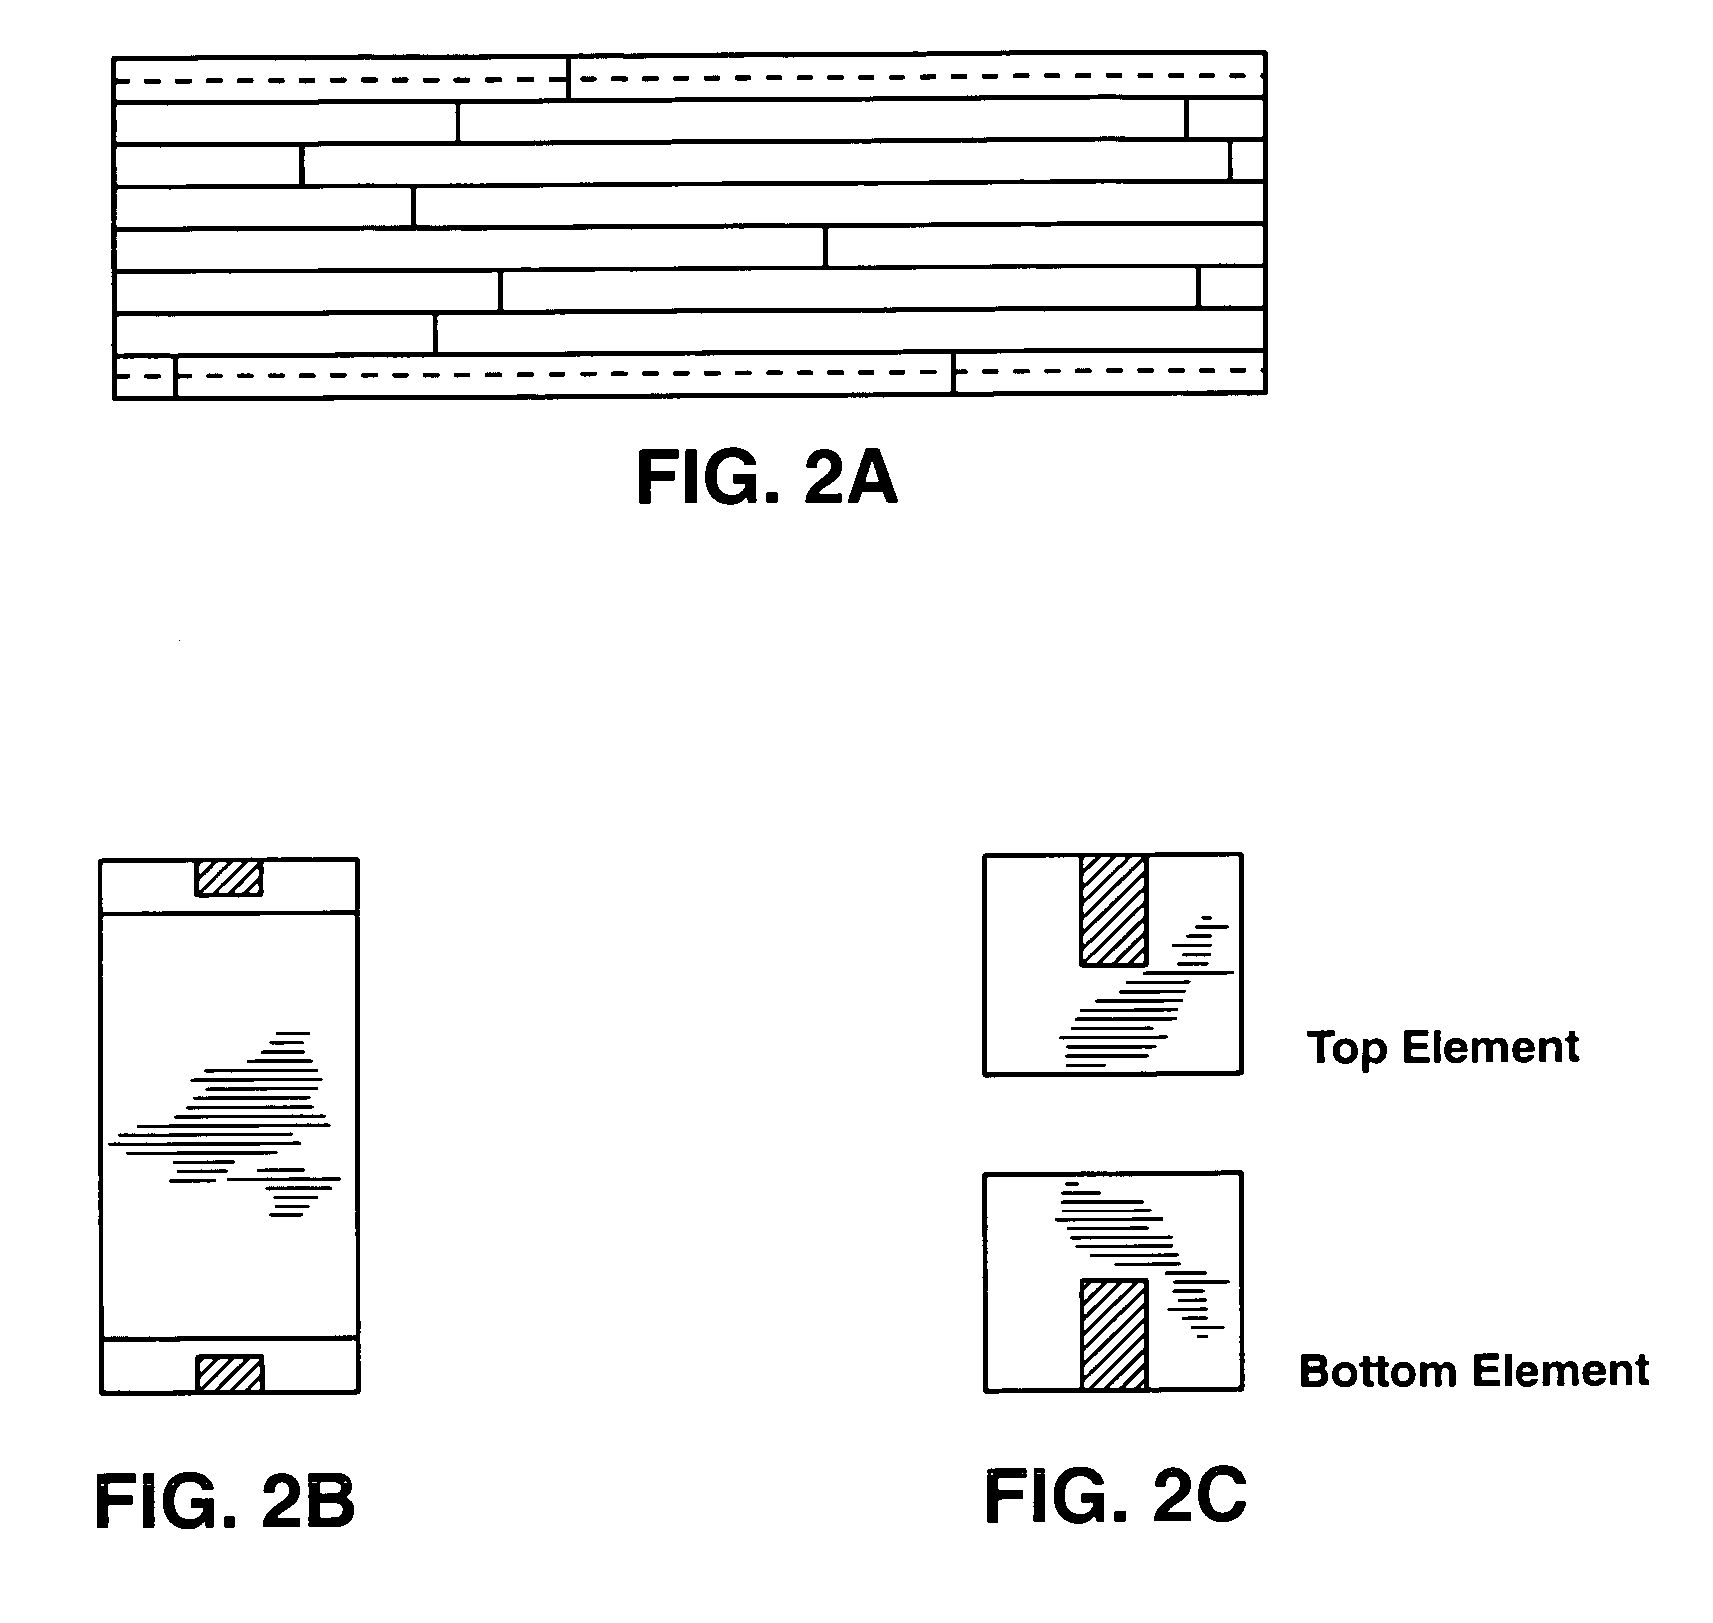 Embedded metal reinforced structural element and methods for design and manufacture